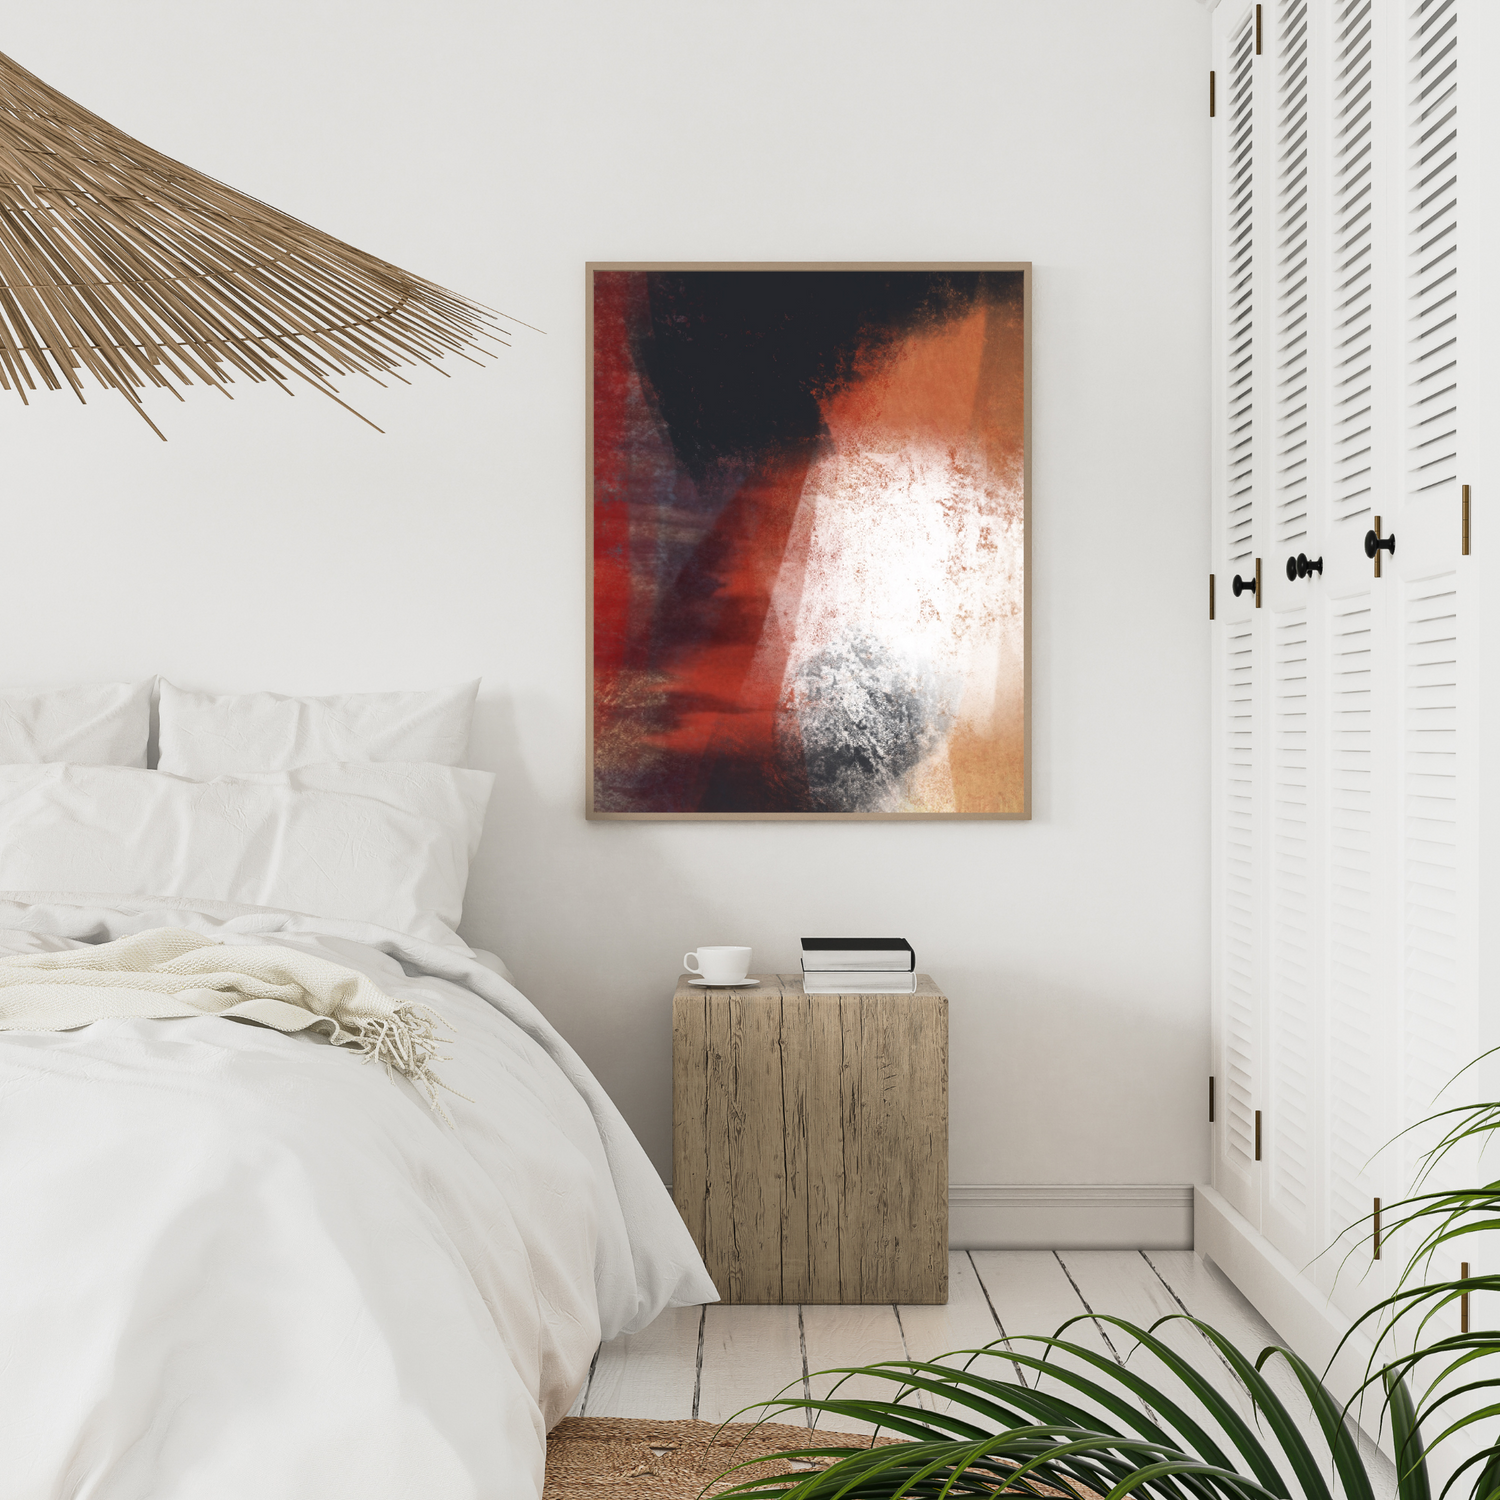 An example of the Red Light painting by ArisaTeam in a bedroom